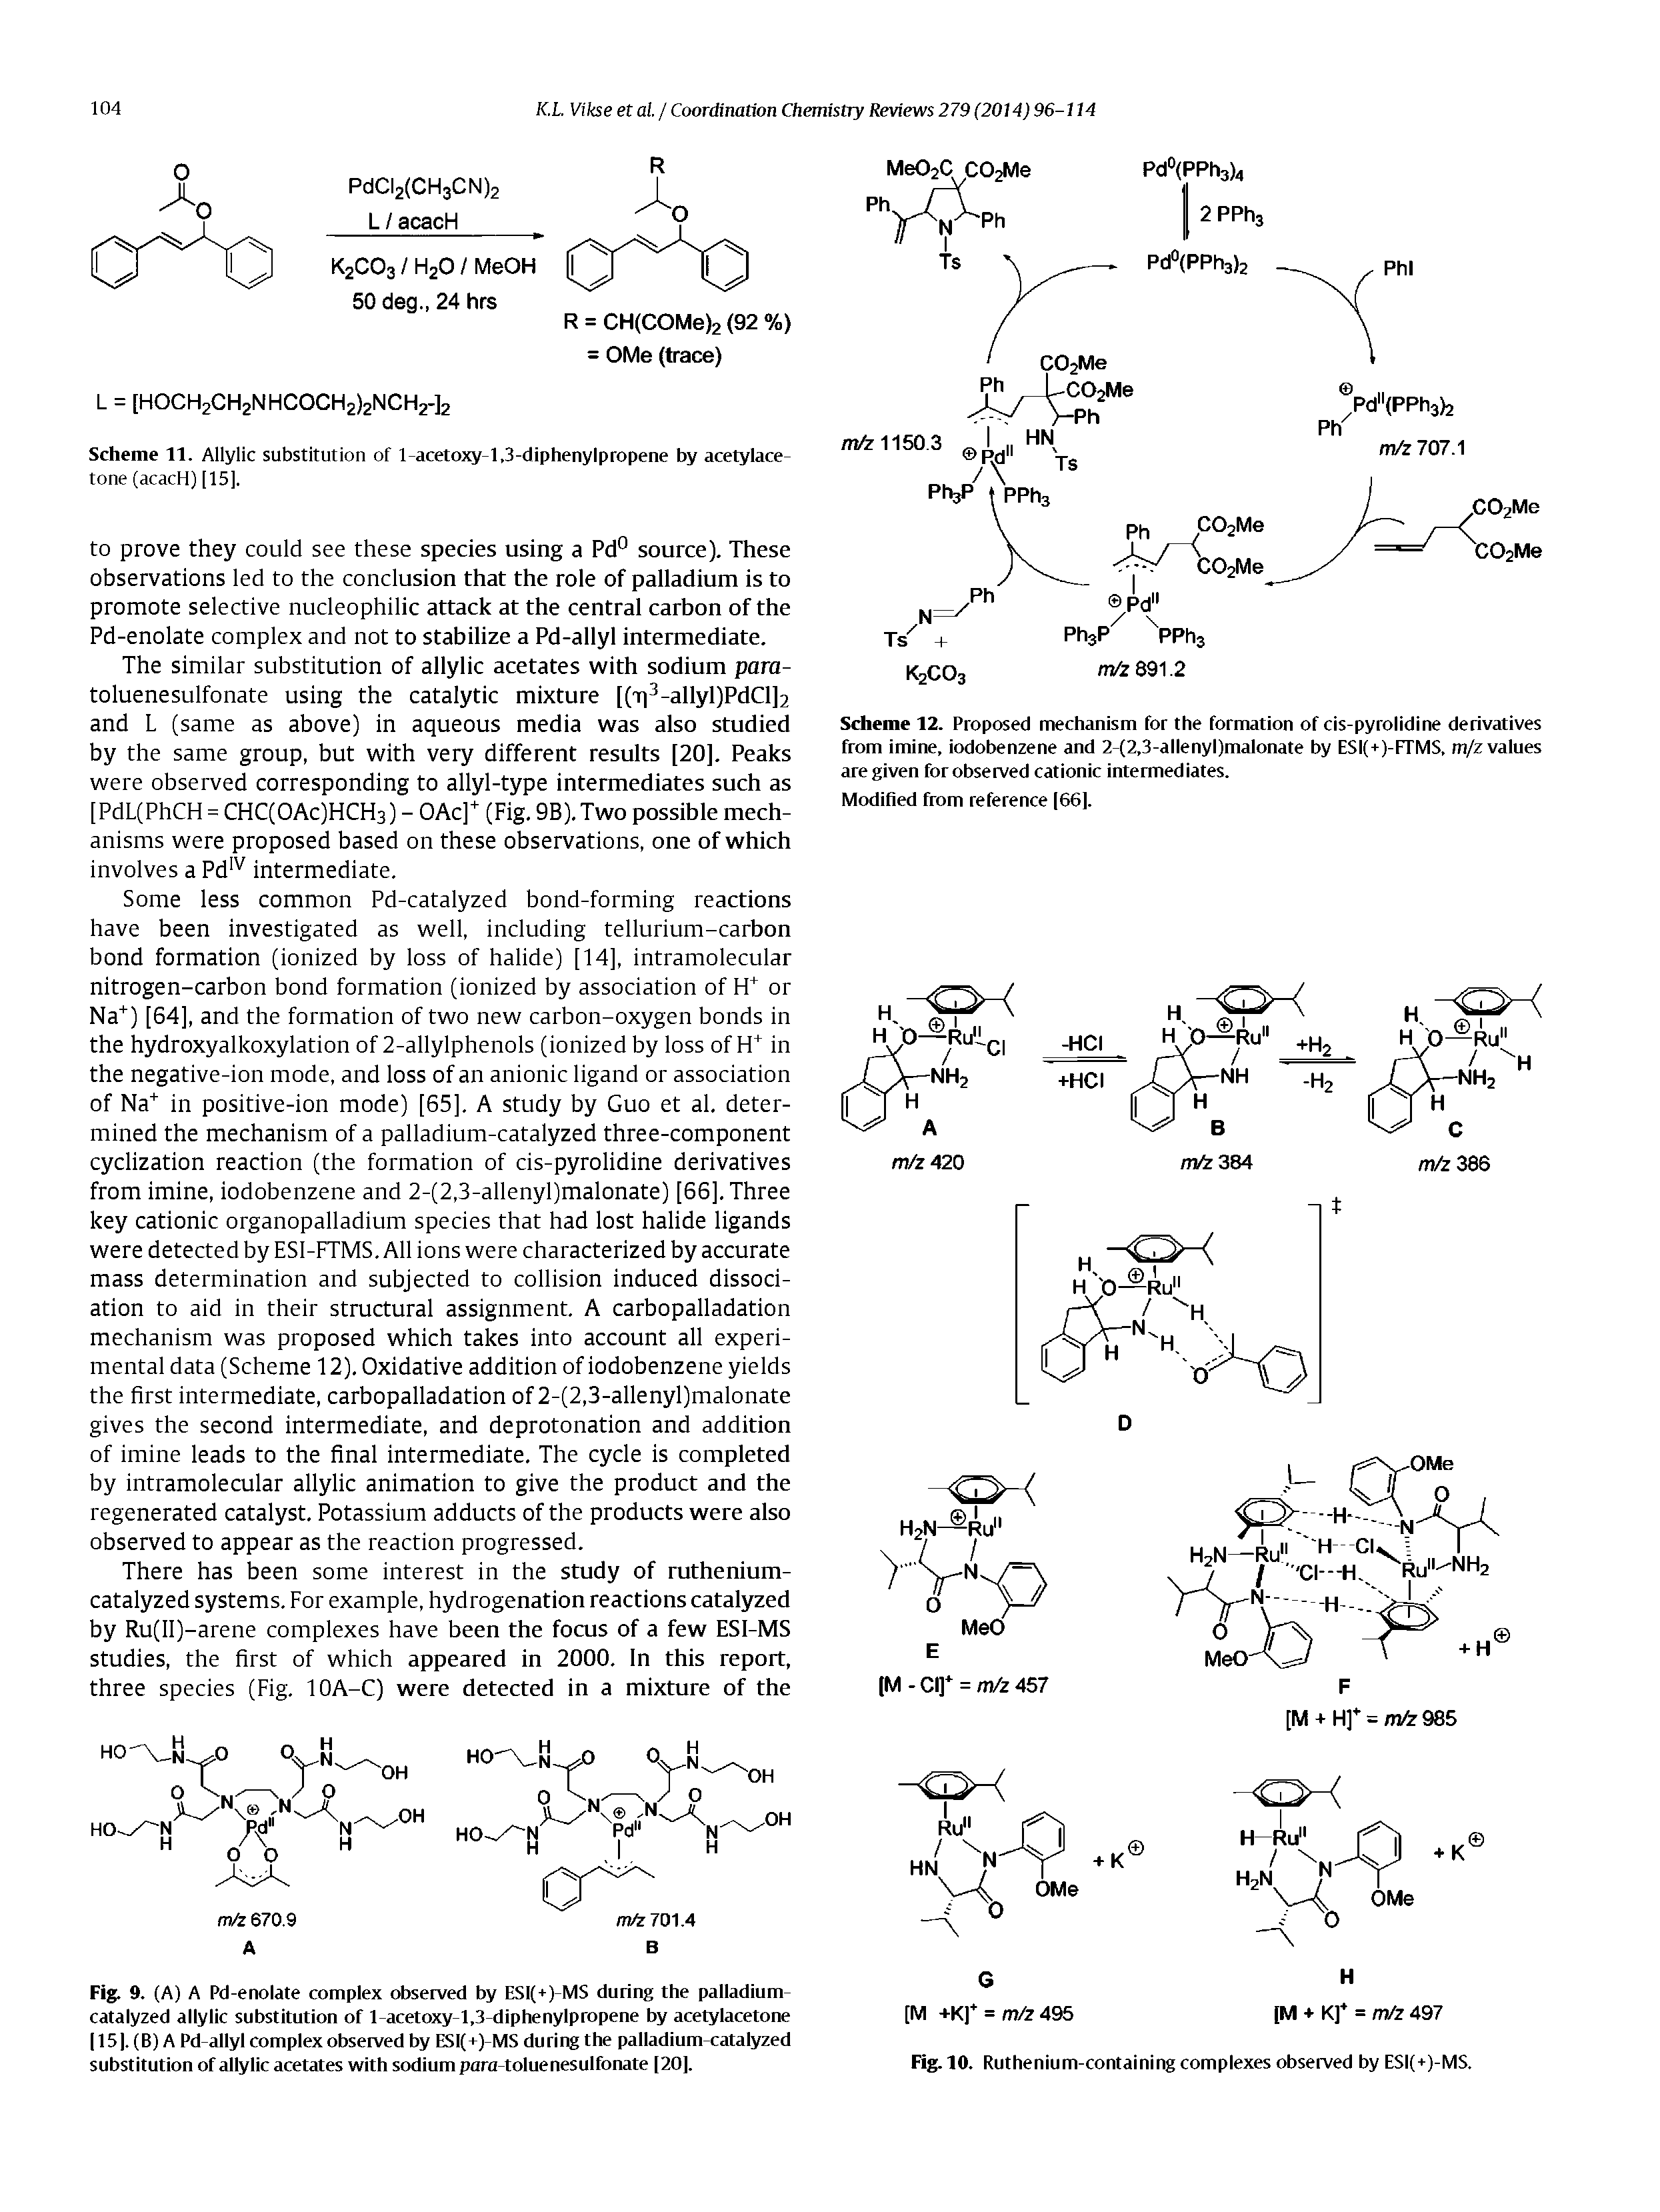 Scheme 12. Proposed mechanism for the formation of cis-pyrolidine derivatives from imine, iodobenzene and 2-(2,3-allenyl)malonate by ESI(+)-FrMS, m/z values are given for observed cationic intermediates.